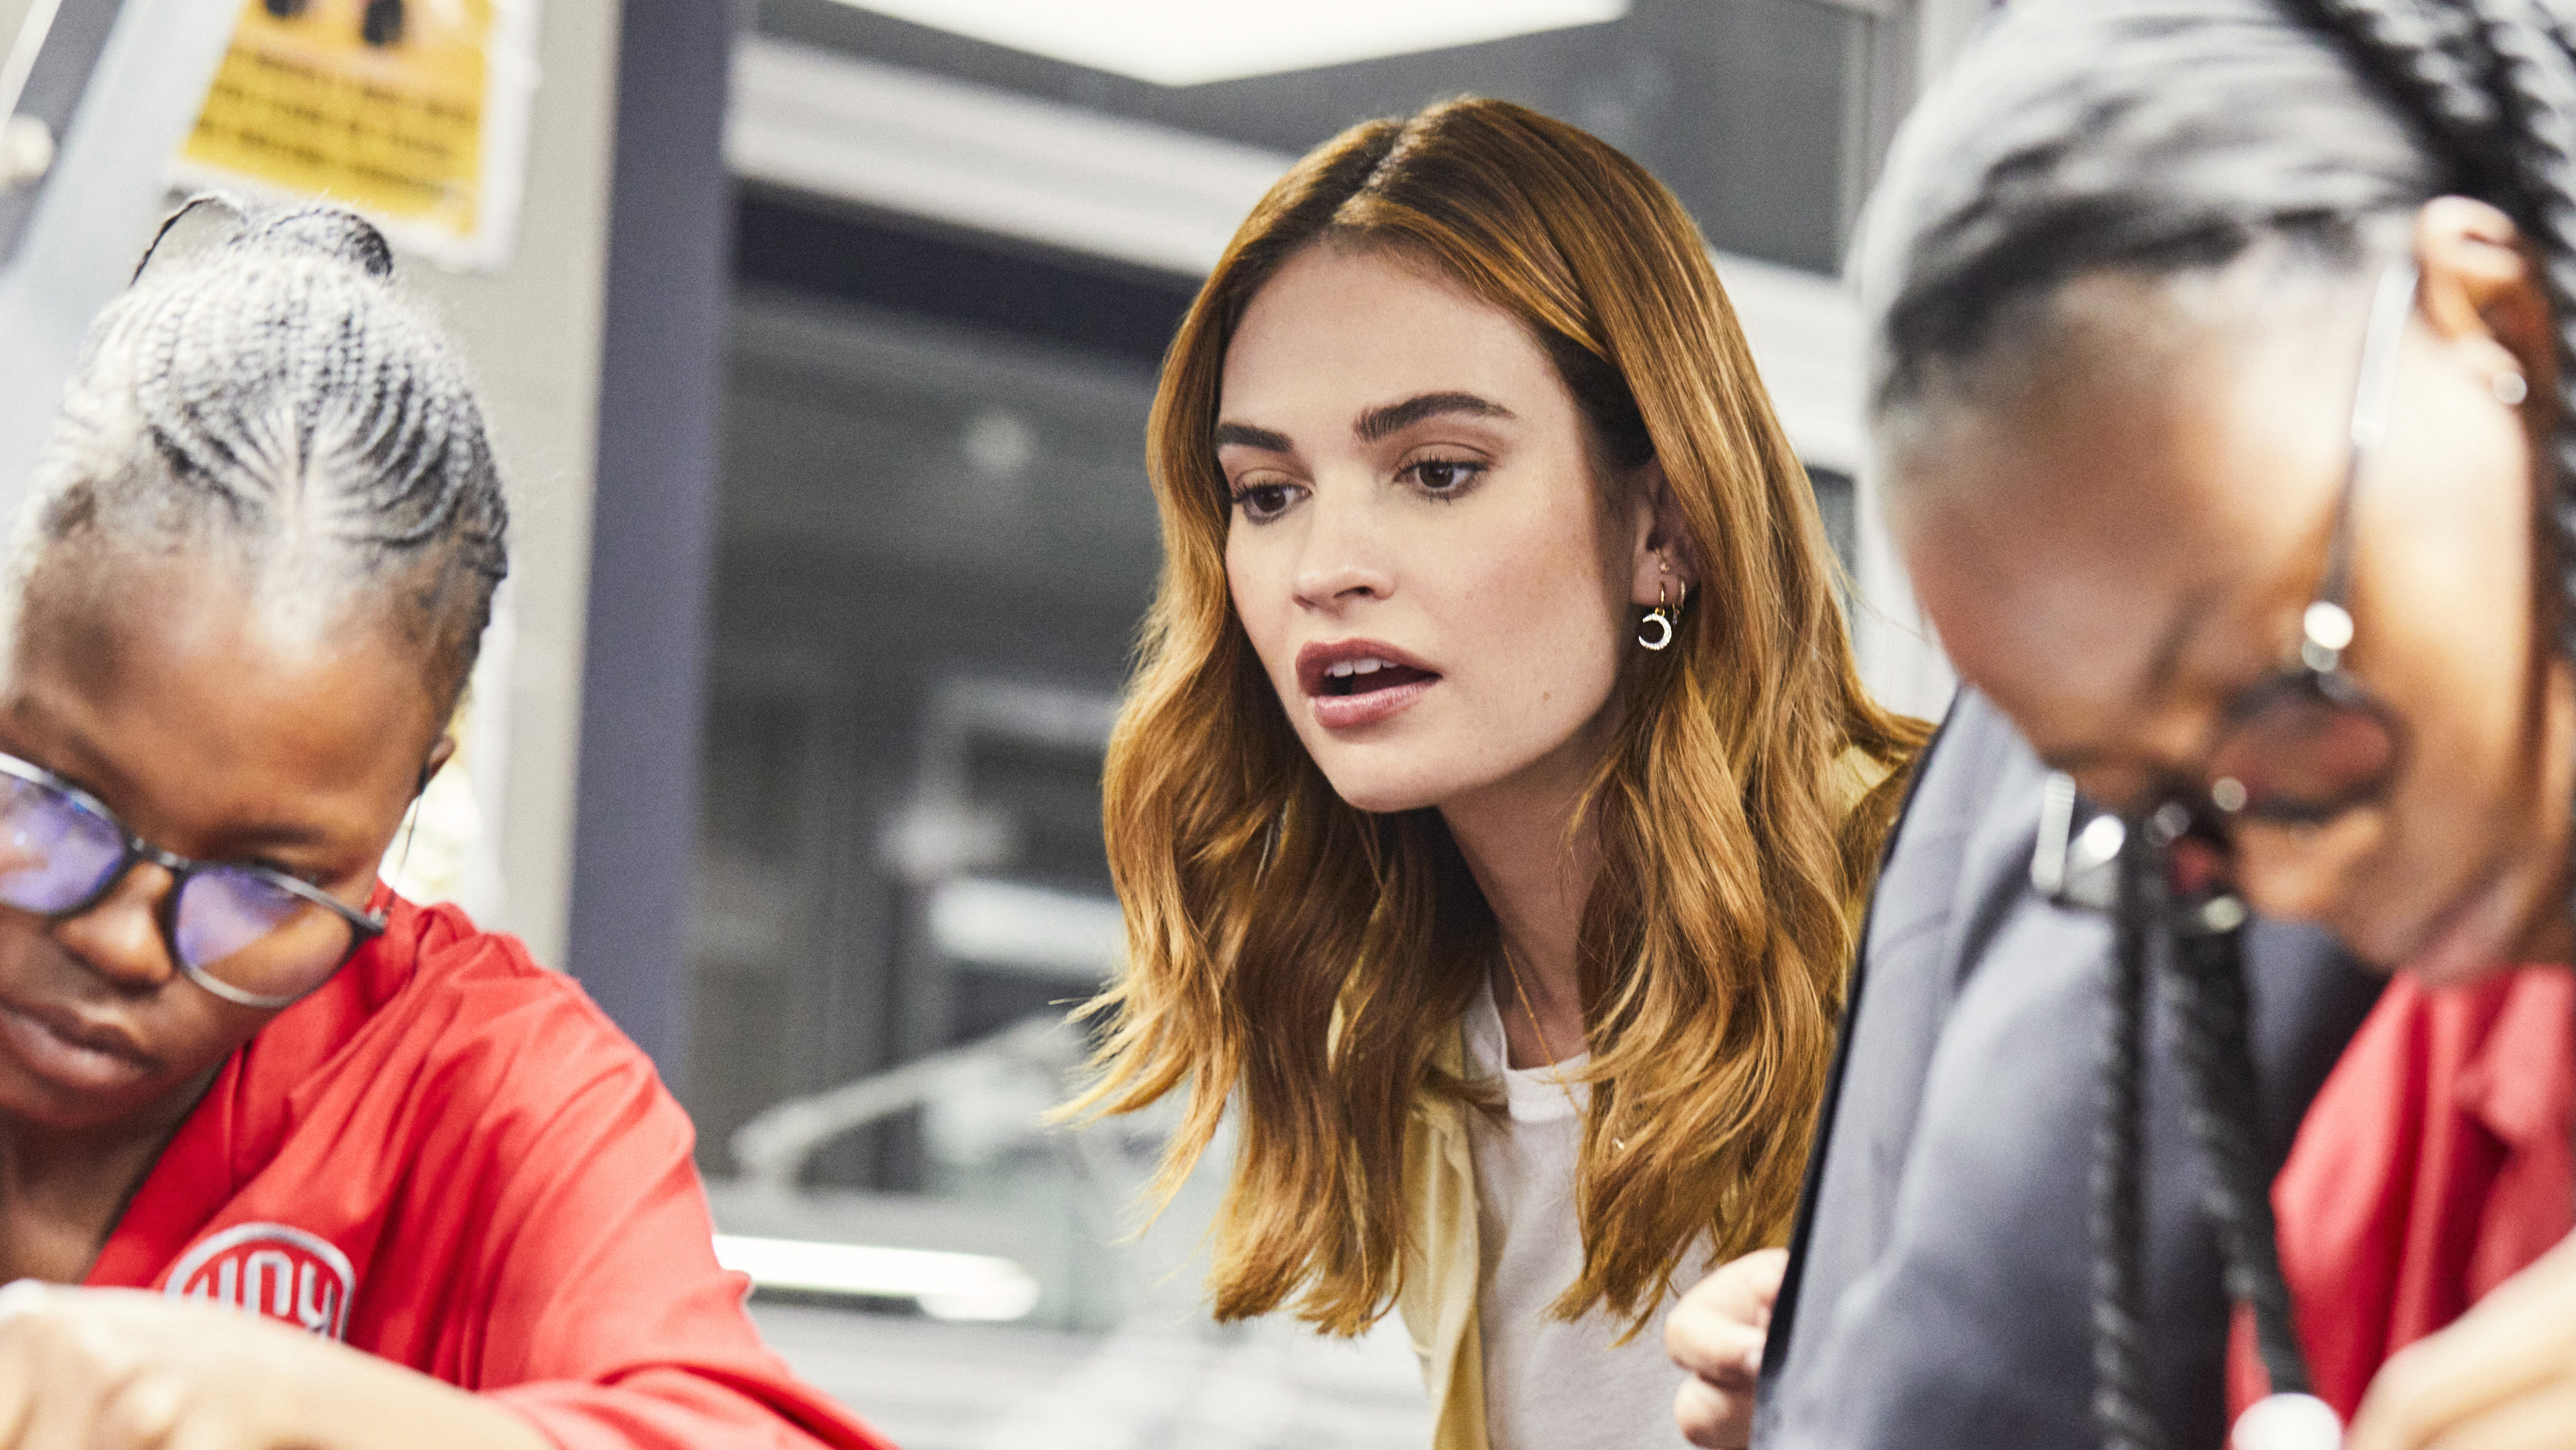 Iron Claw actress Lily James visits diamond mines in Botswana as the Global Ambassador for Only Natural Diamonds, presented by the Natural Diamond Council